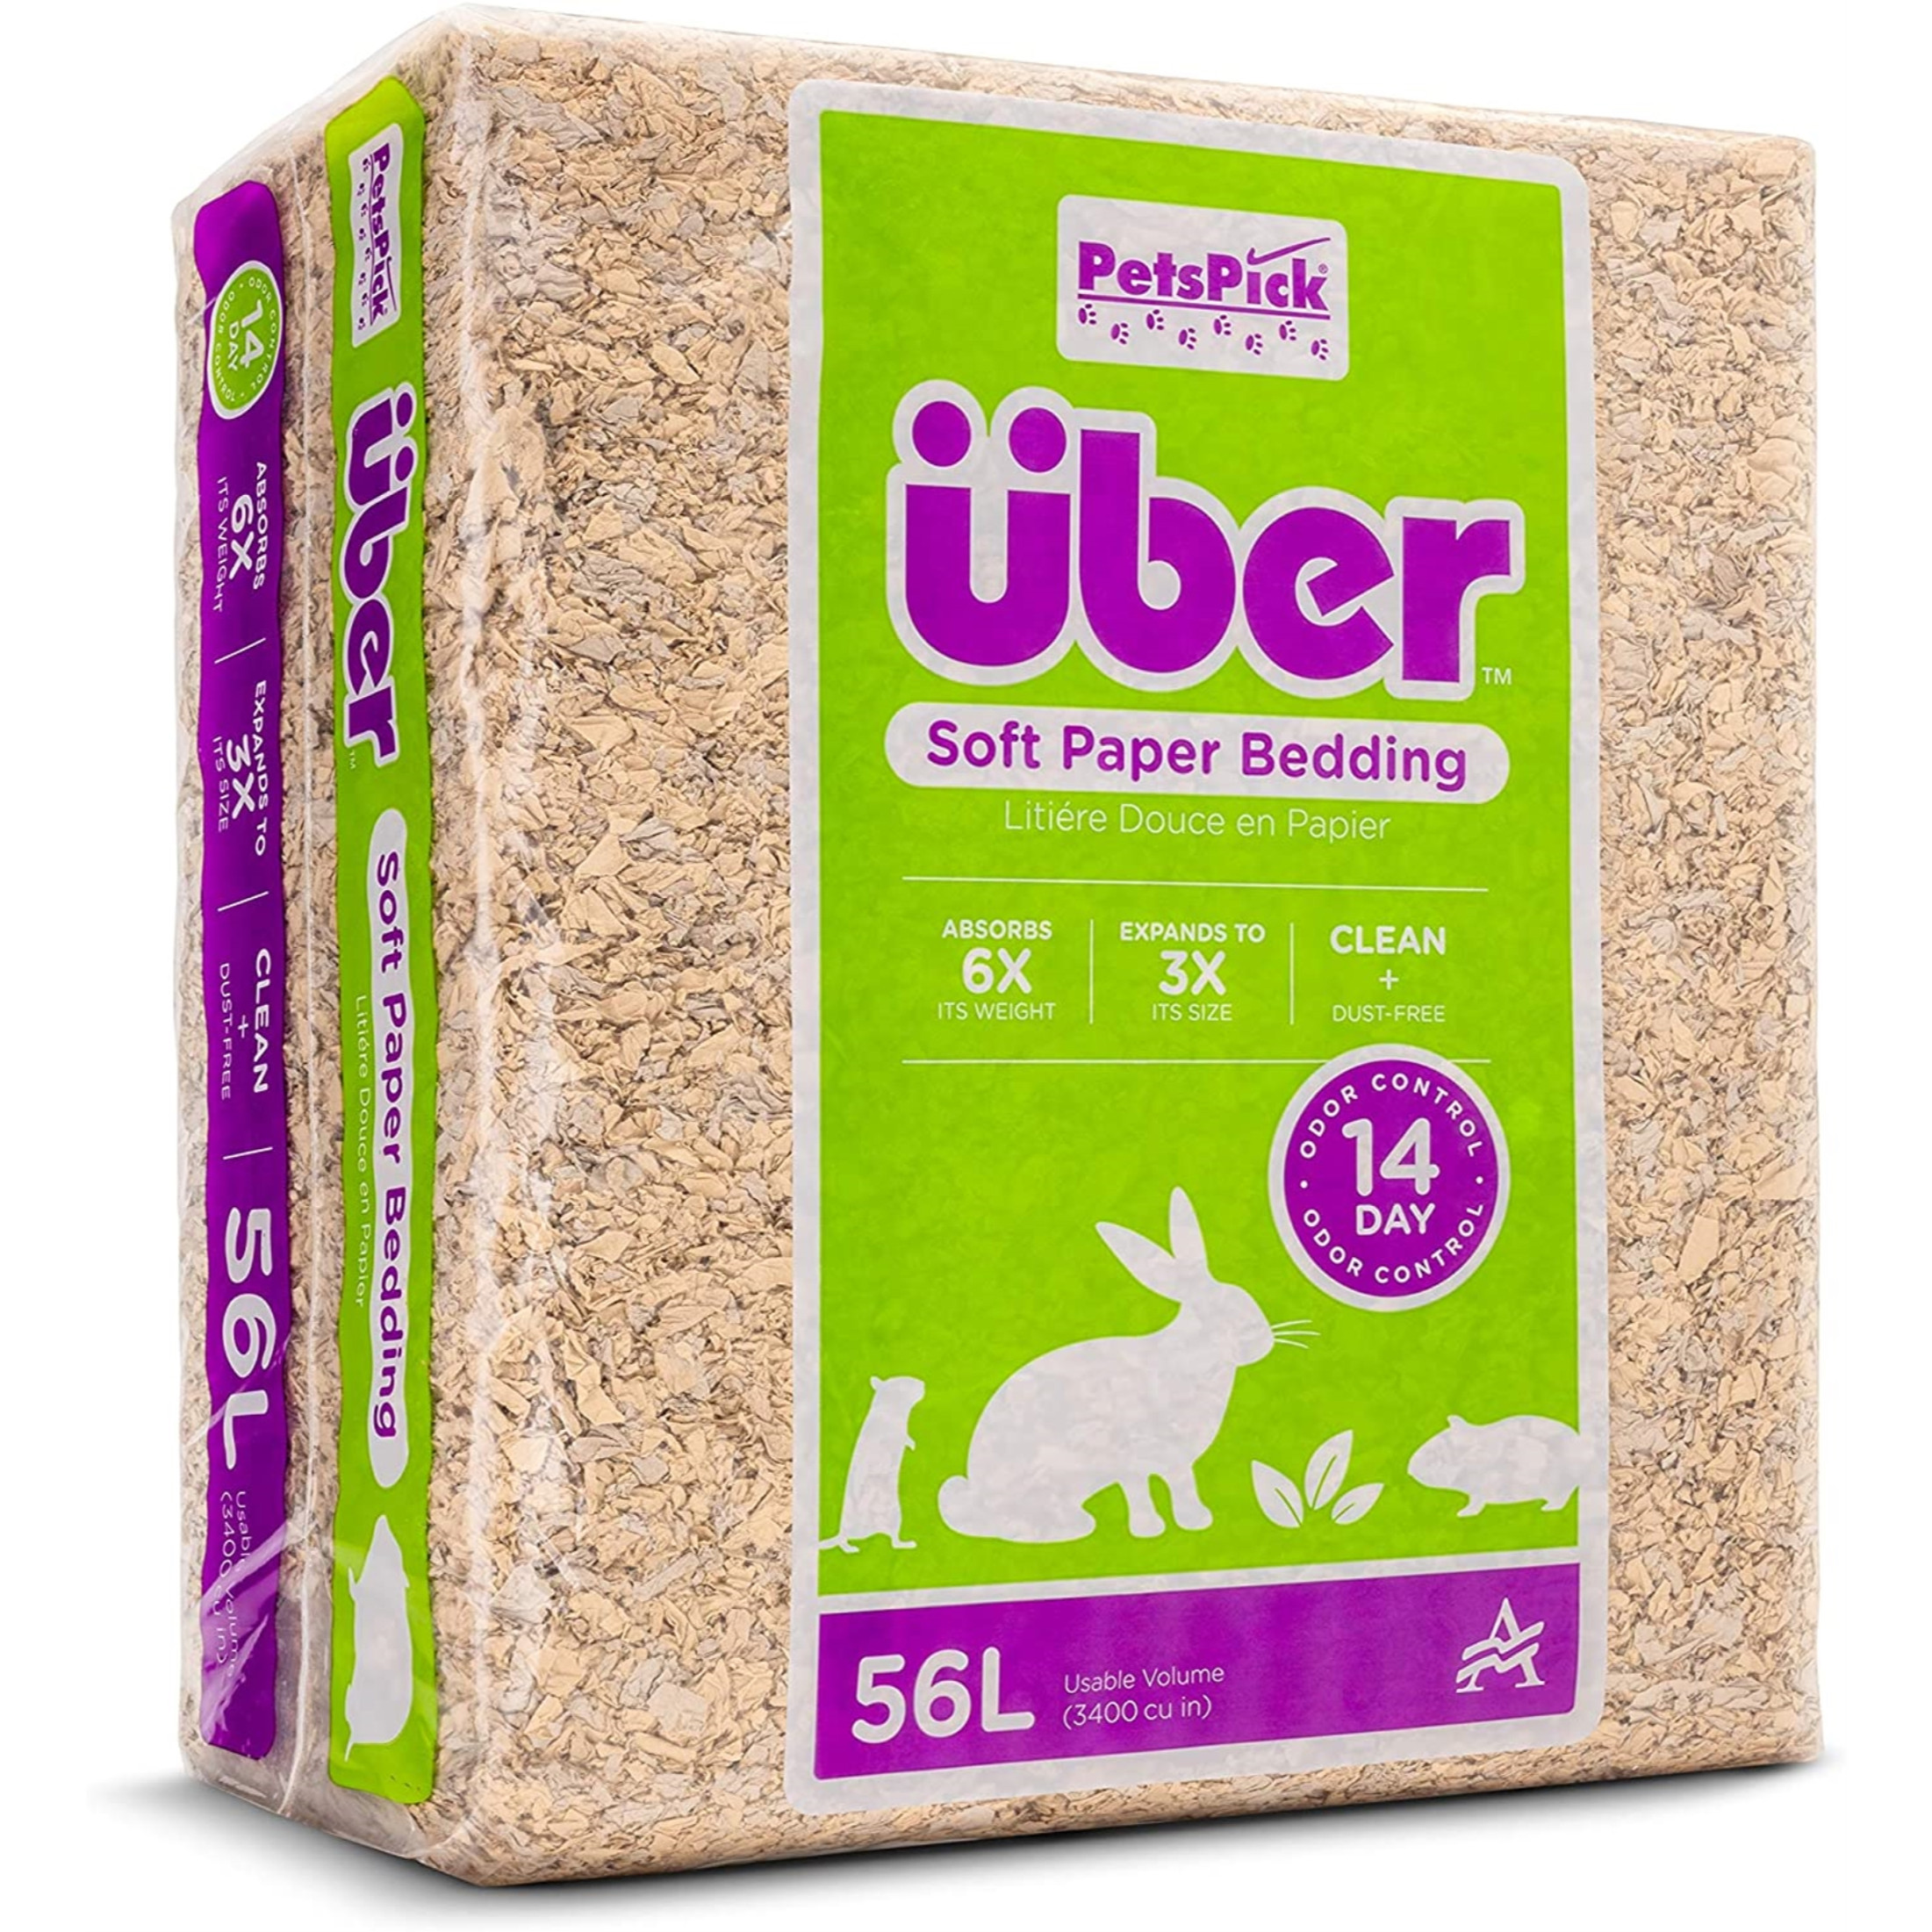 PetsPick Uber Soft Paper Pet Bedding for Small Animals, Natural 56L